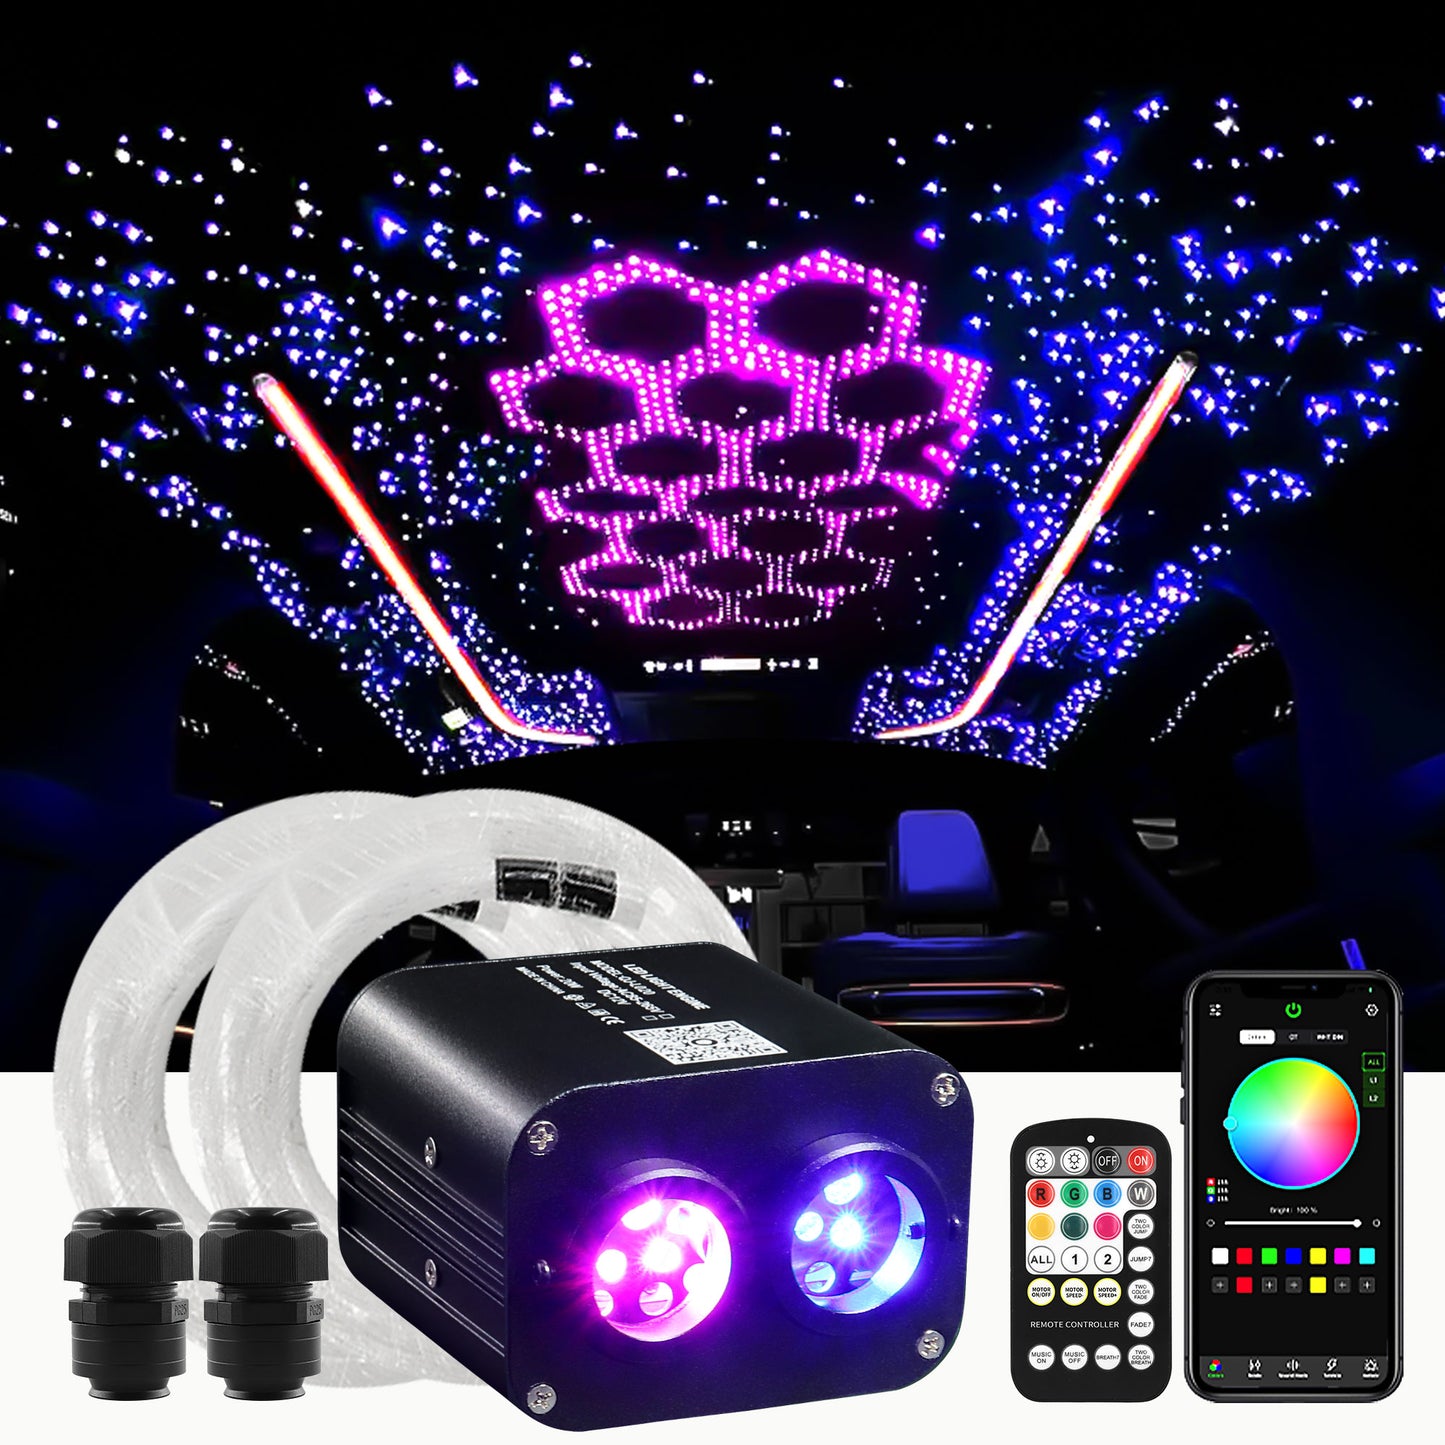 BEESIDY 20W Twinkle Dual Color Fiber Optic Lighting Kit, Starlight Headliner Kit for Car/Home Use,Star Roof Lights with Bluetooth App/Remote Control